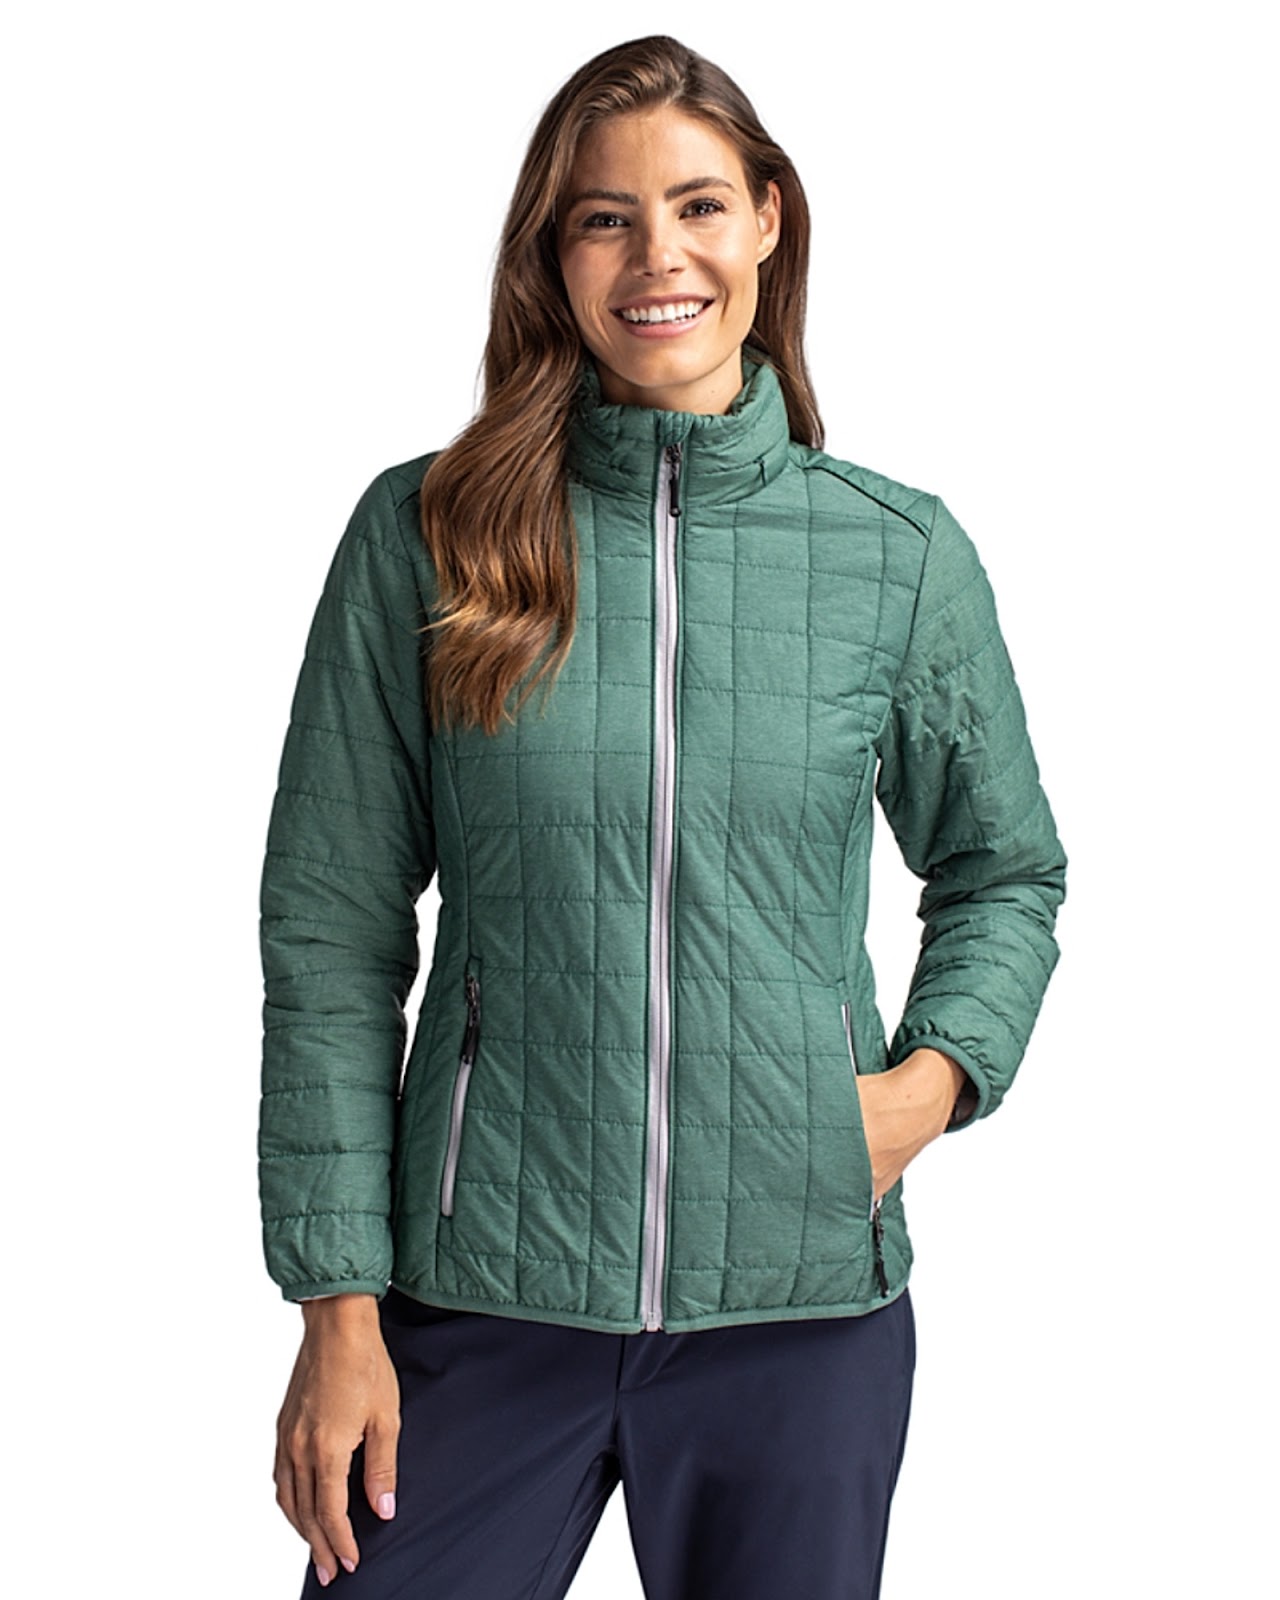 Best womens insulated jacket for outdoor lovers in 2023